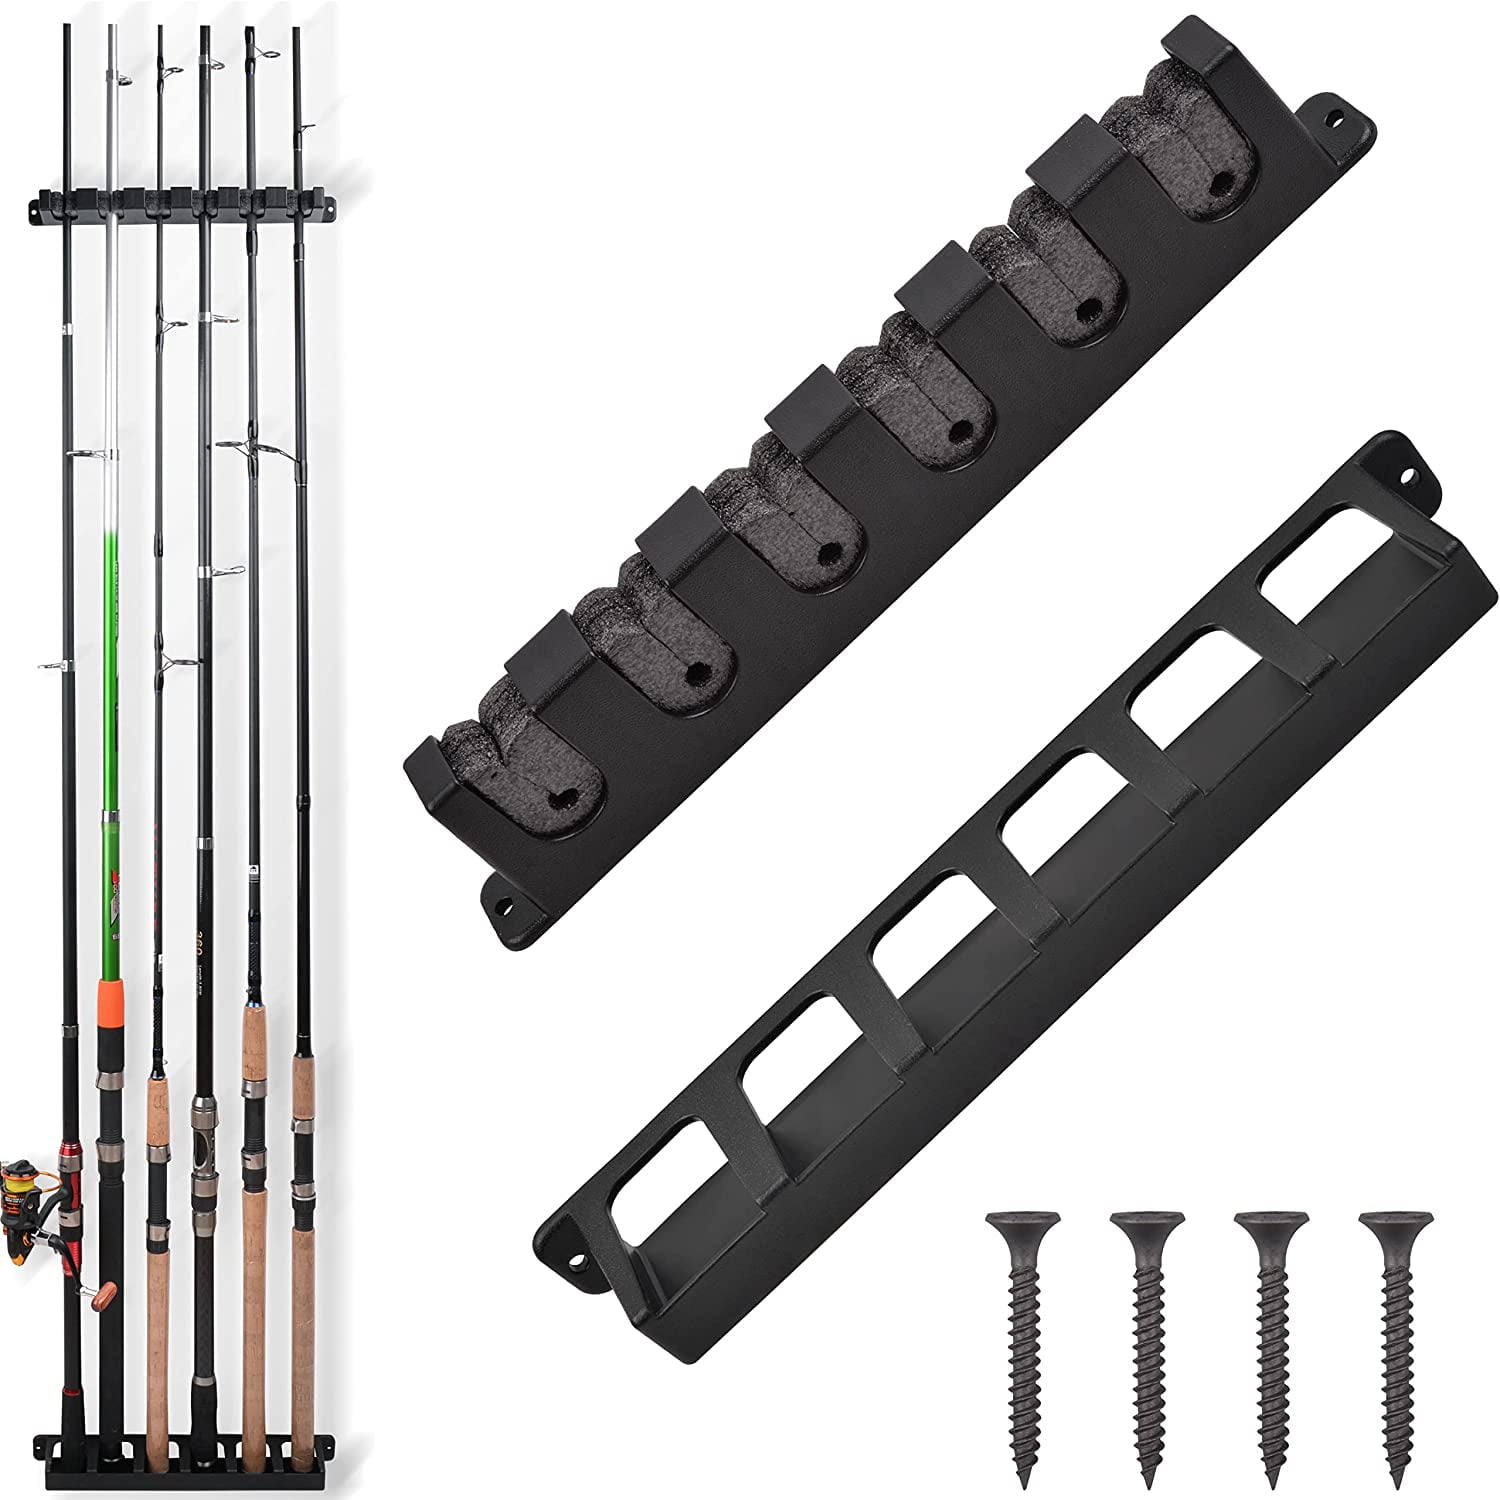 PLUSINNO V9 Vertical Fishing Rod Holders, 4 Packs Wall Mounted